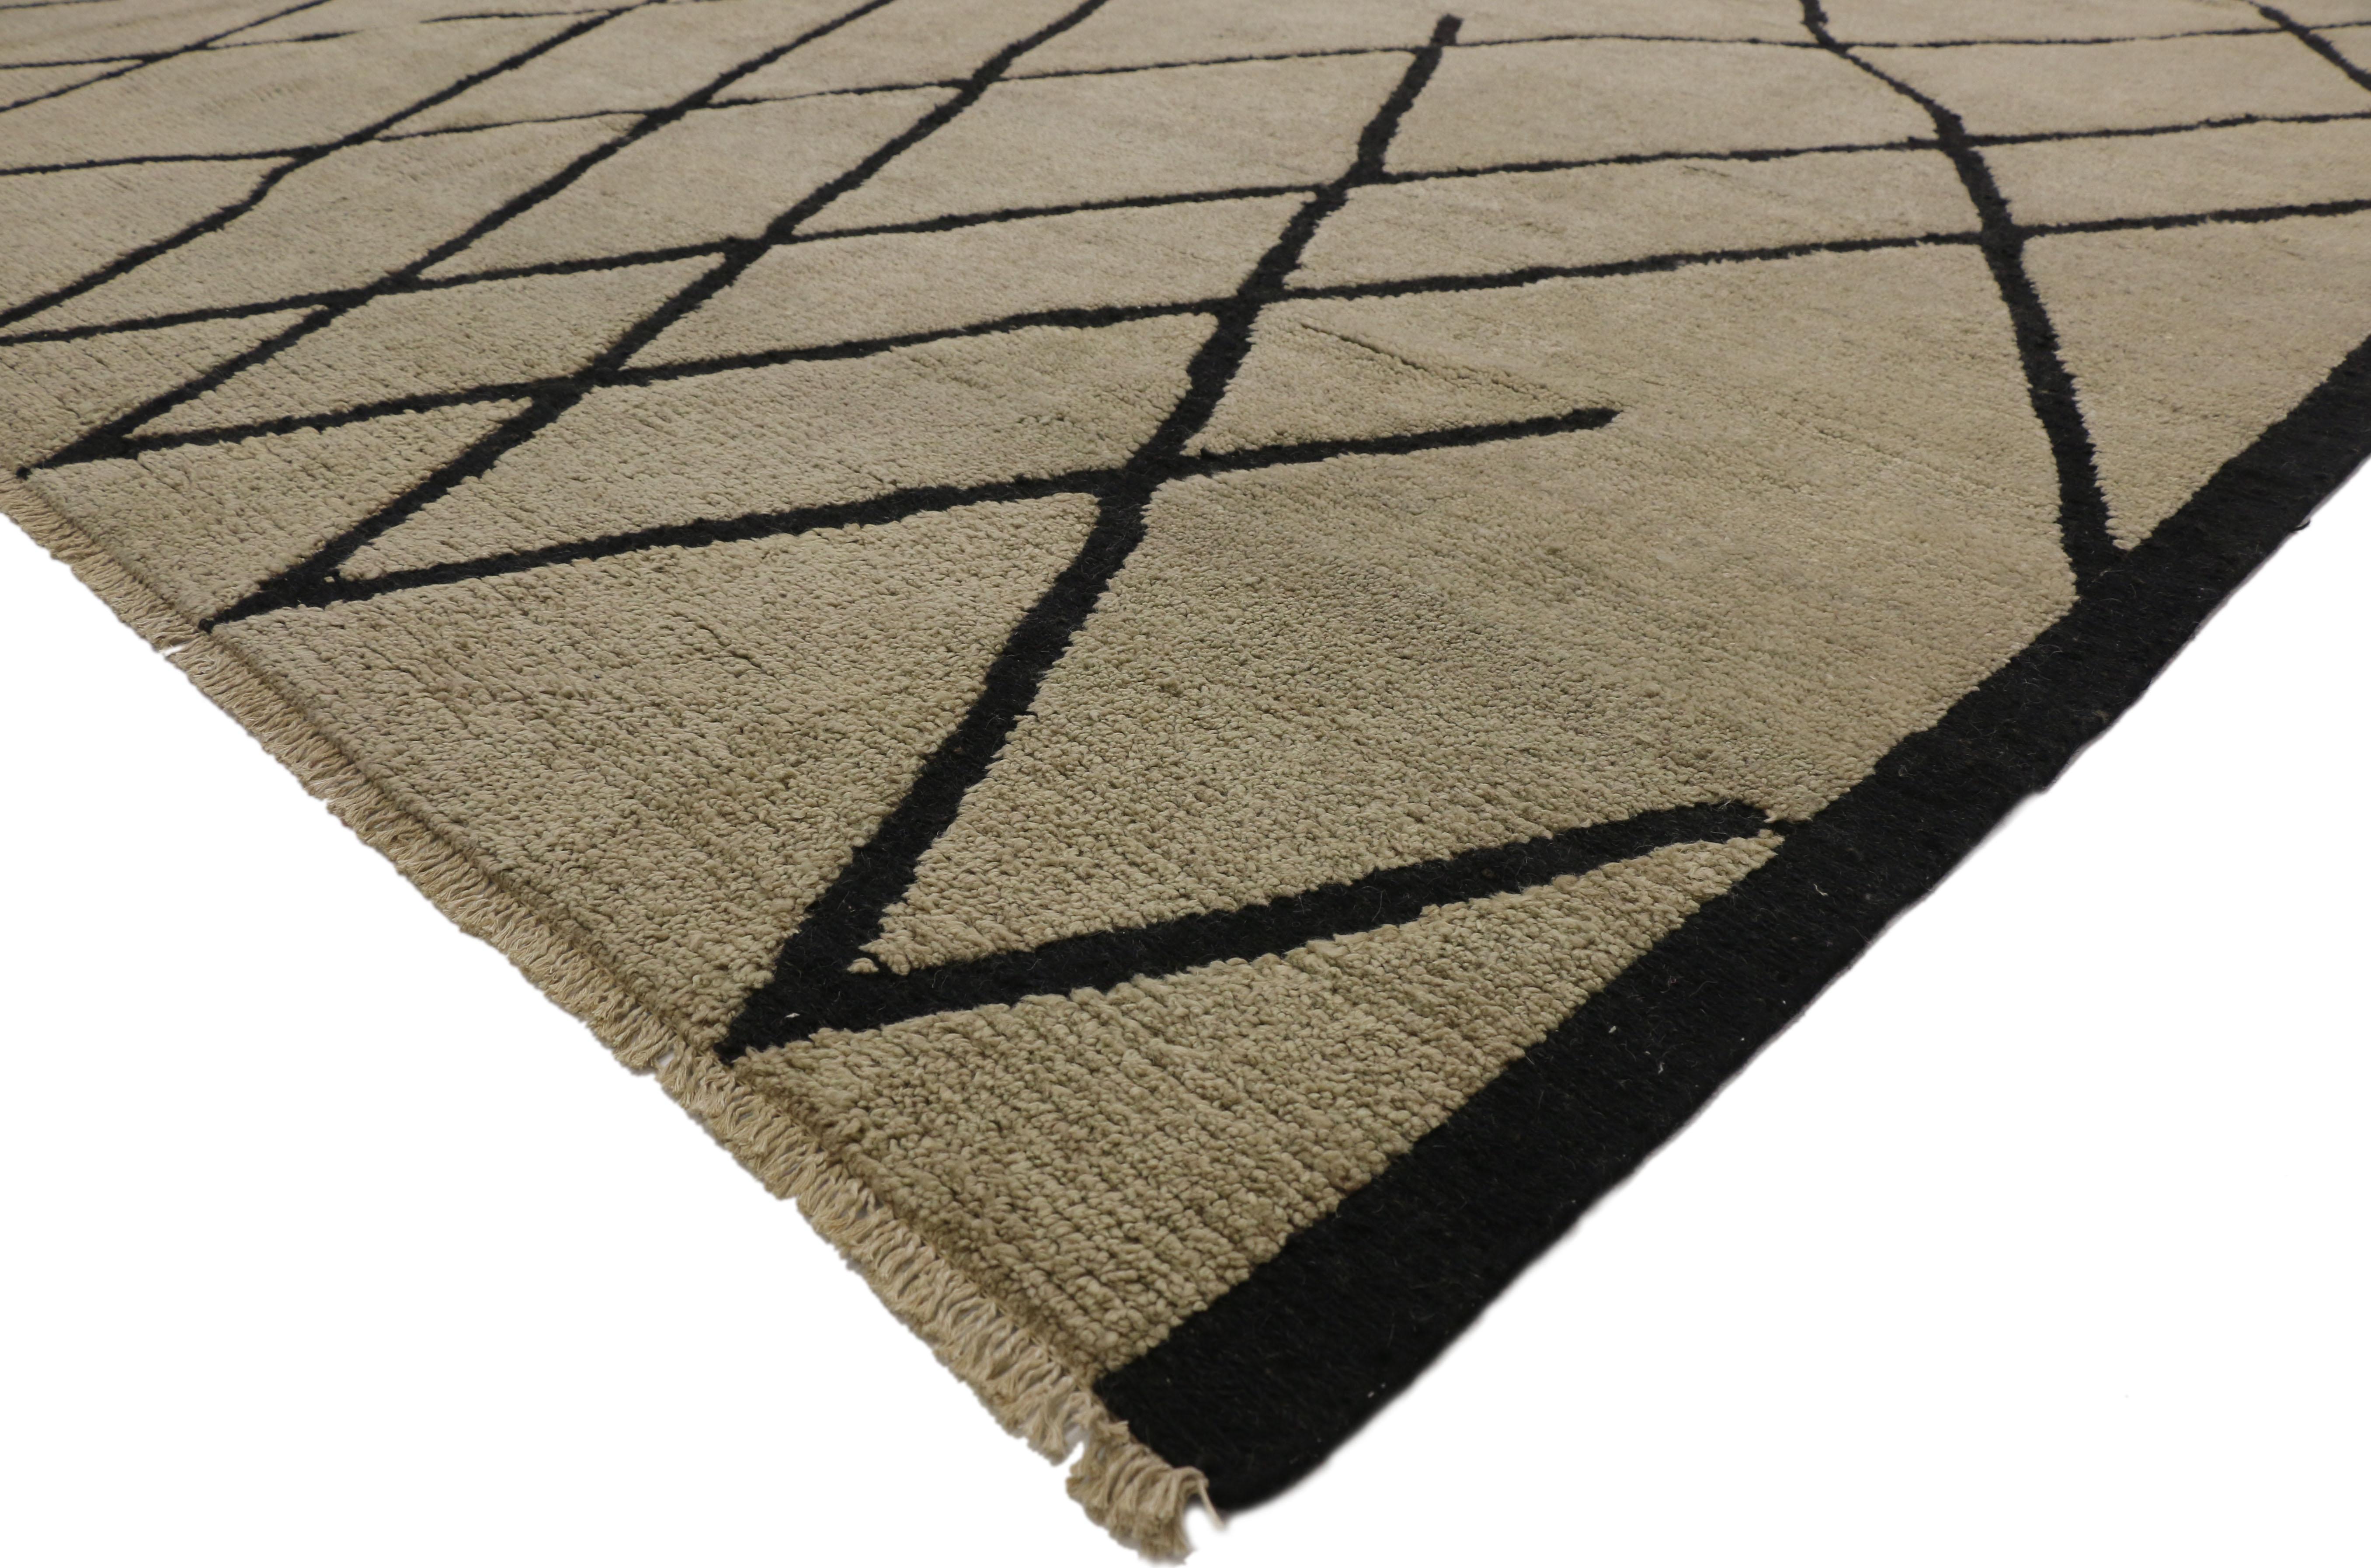 80502 New Contemporary Moroccan Area rug with Modernist style. This hand knotted wool contemporary Moroccan area rug features contrasting black lines running the length of the sandy-ecru backdrop. The bold black lines crisscross in an organic